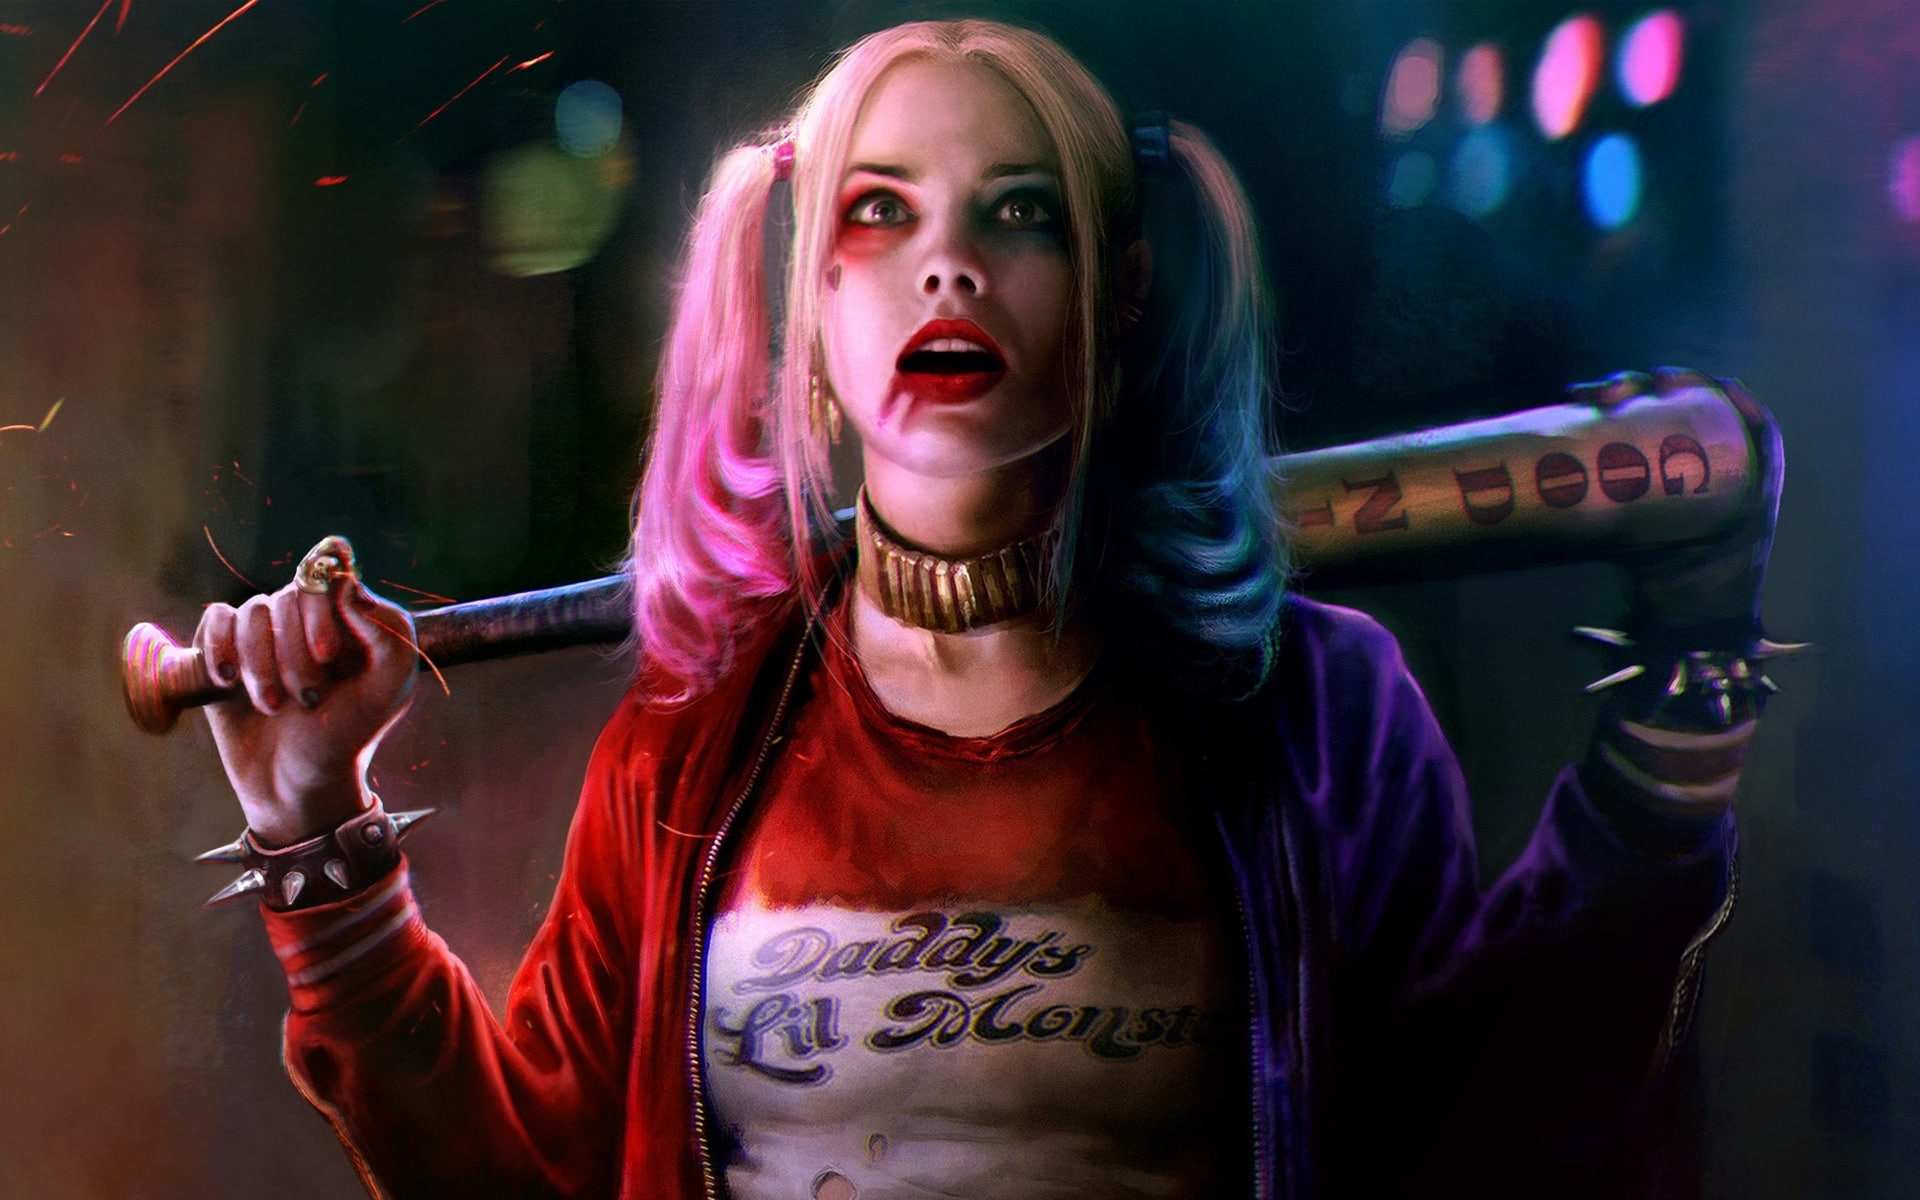 harley quinn, suicide squad, margot robbie, Movies, young adult